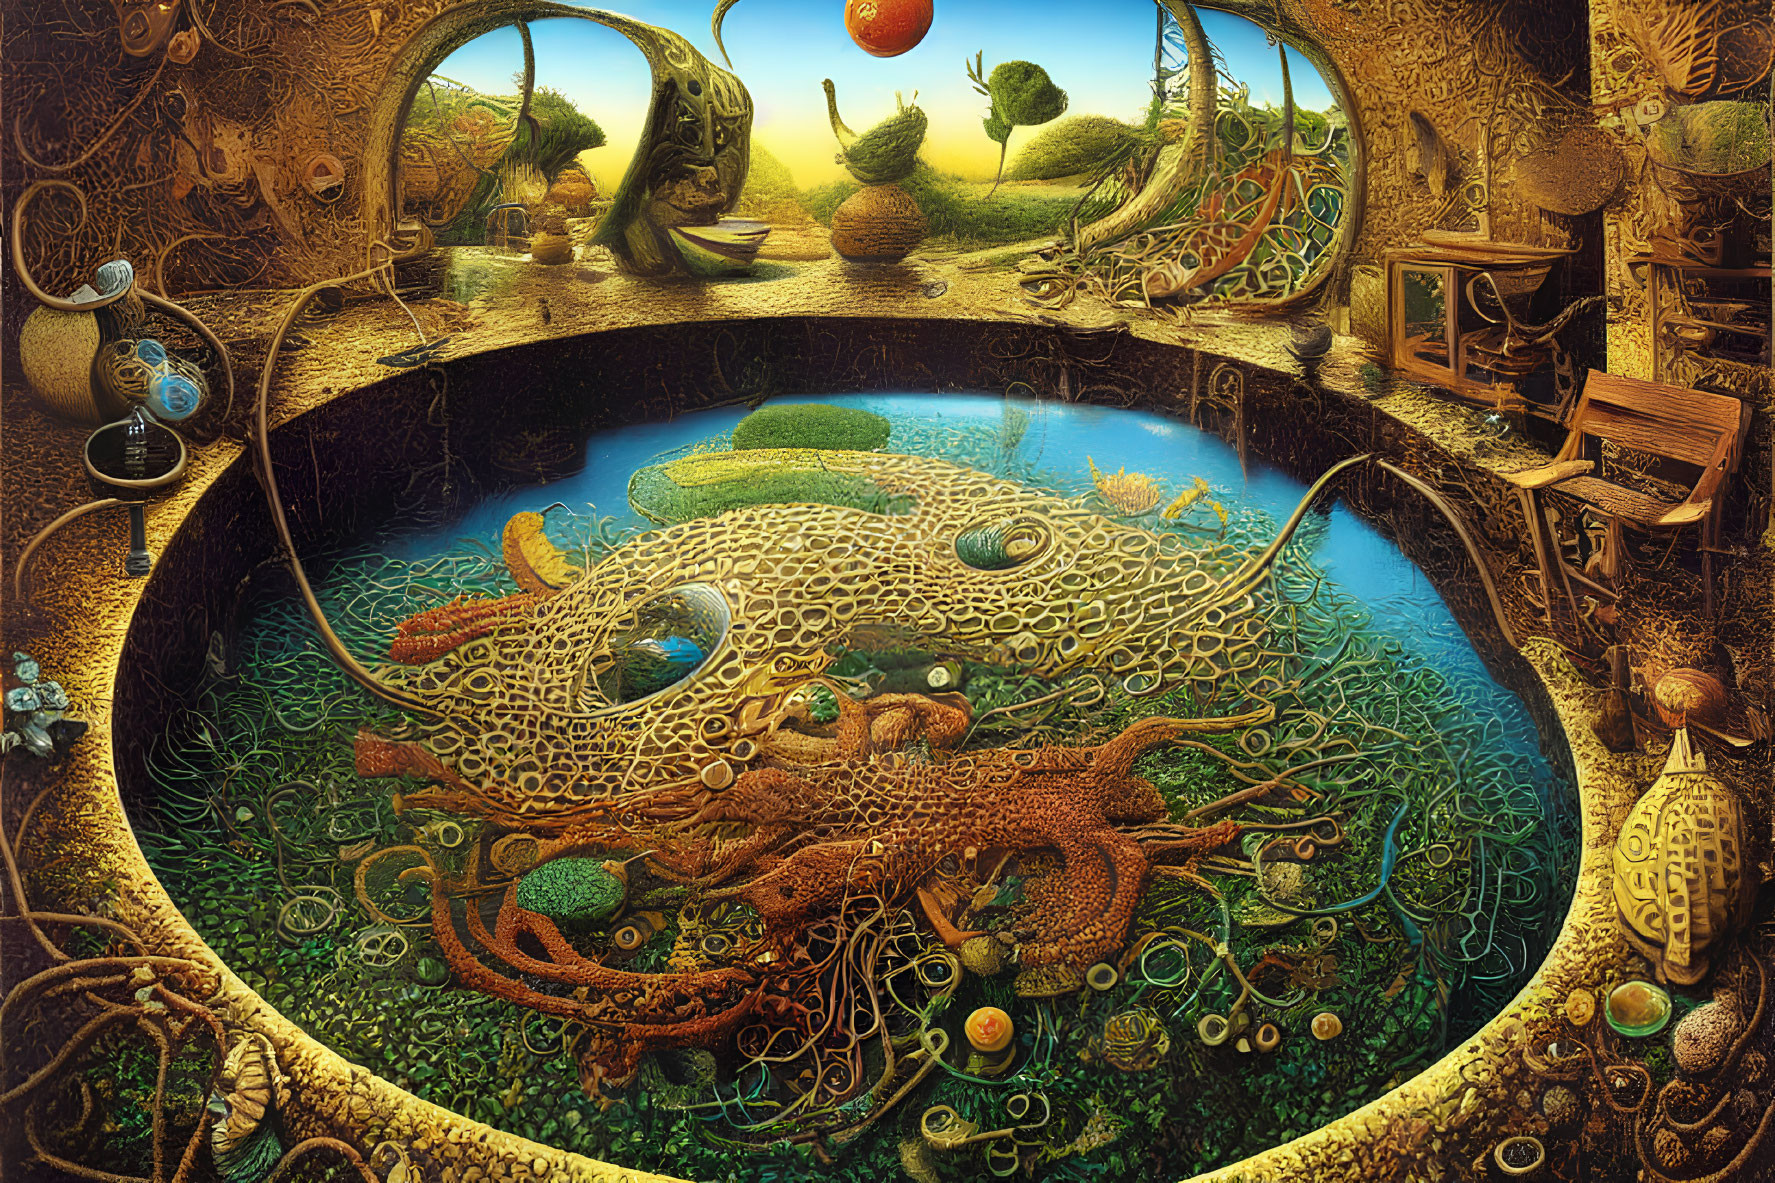 Fantasy landscape with surreal organic architecture and whimsical dragon creature